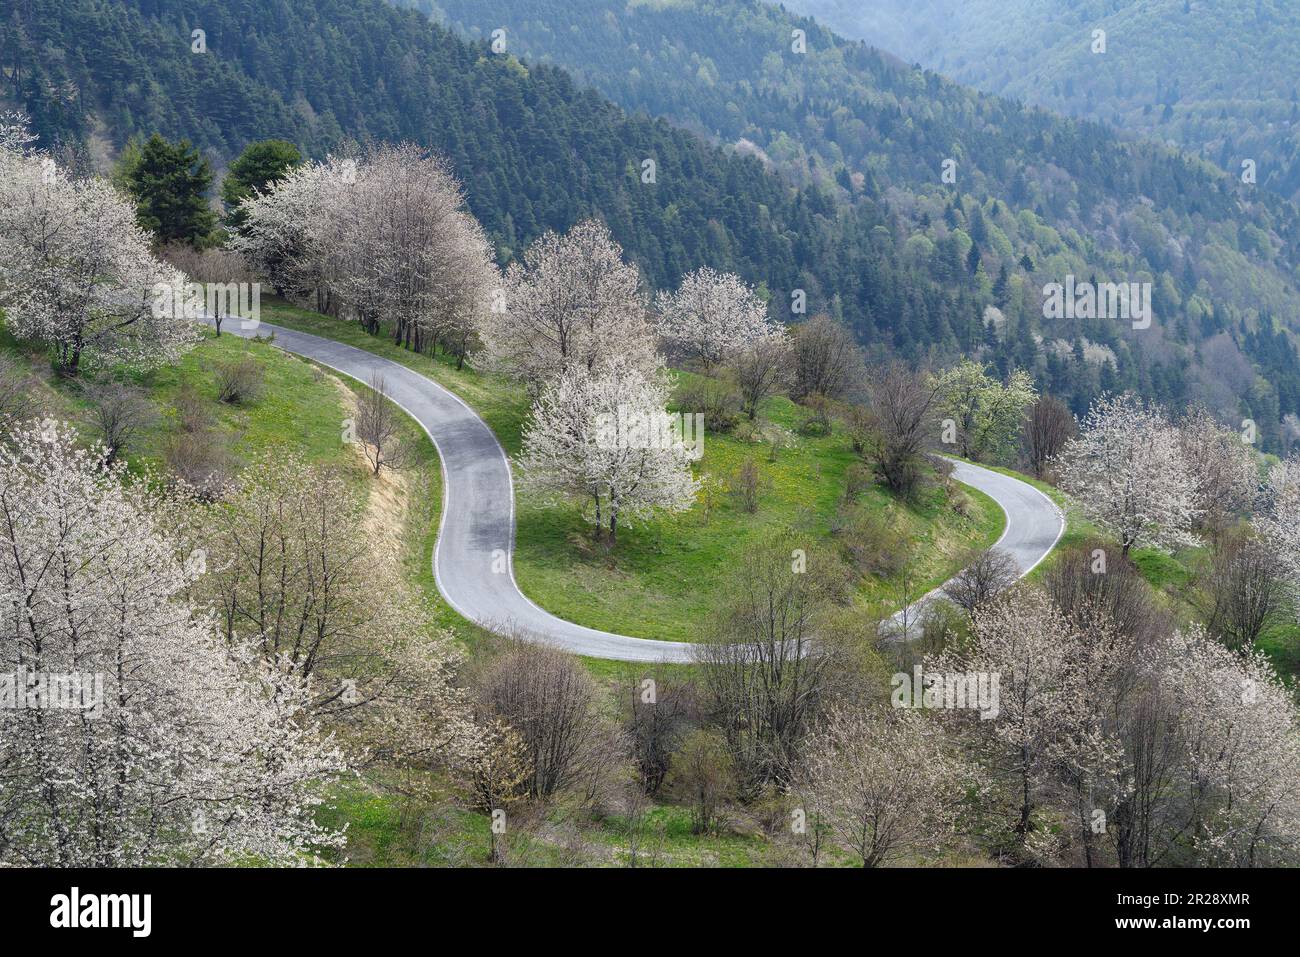 Elevated view of road through the mountains, Ligurian Alps, Italy Stock Photo